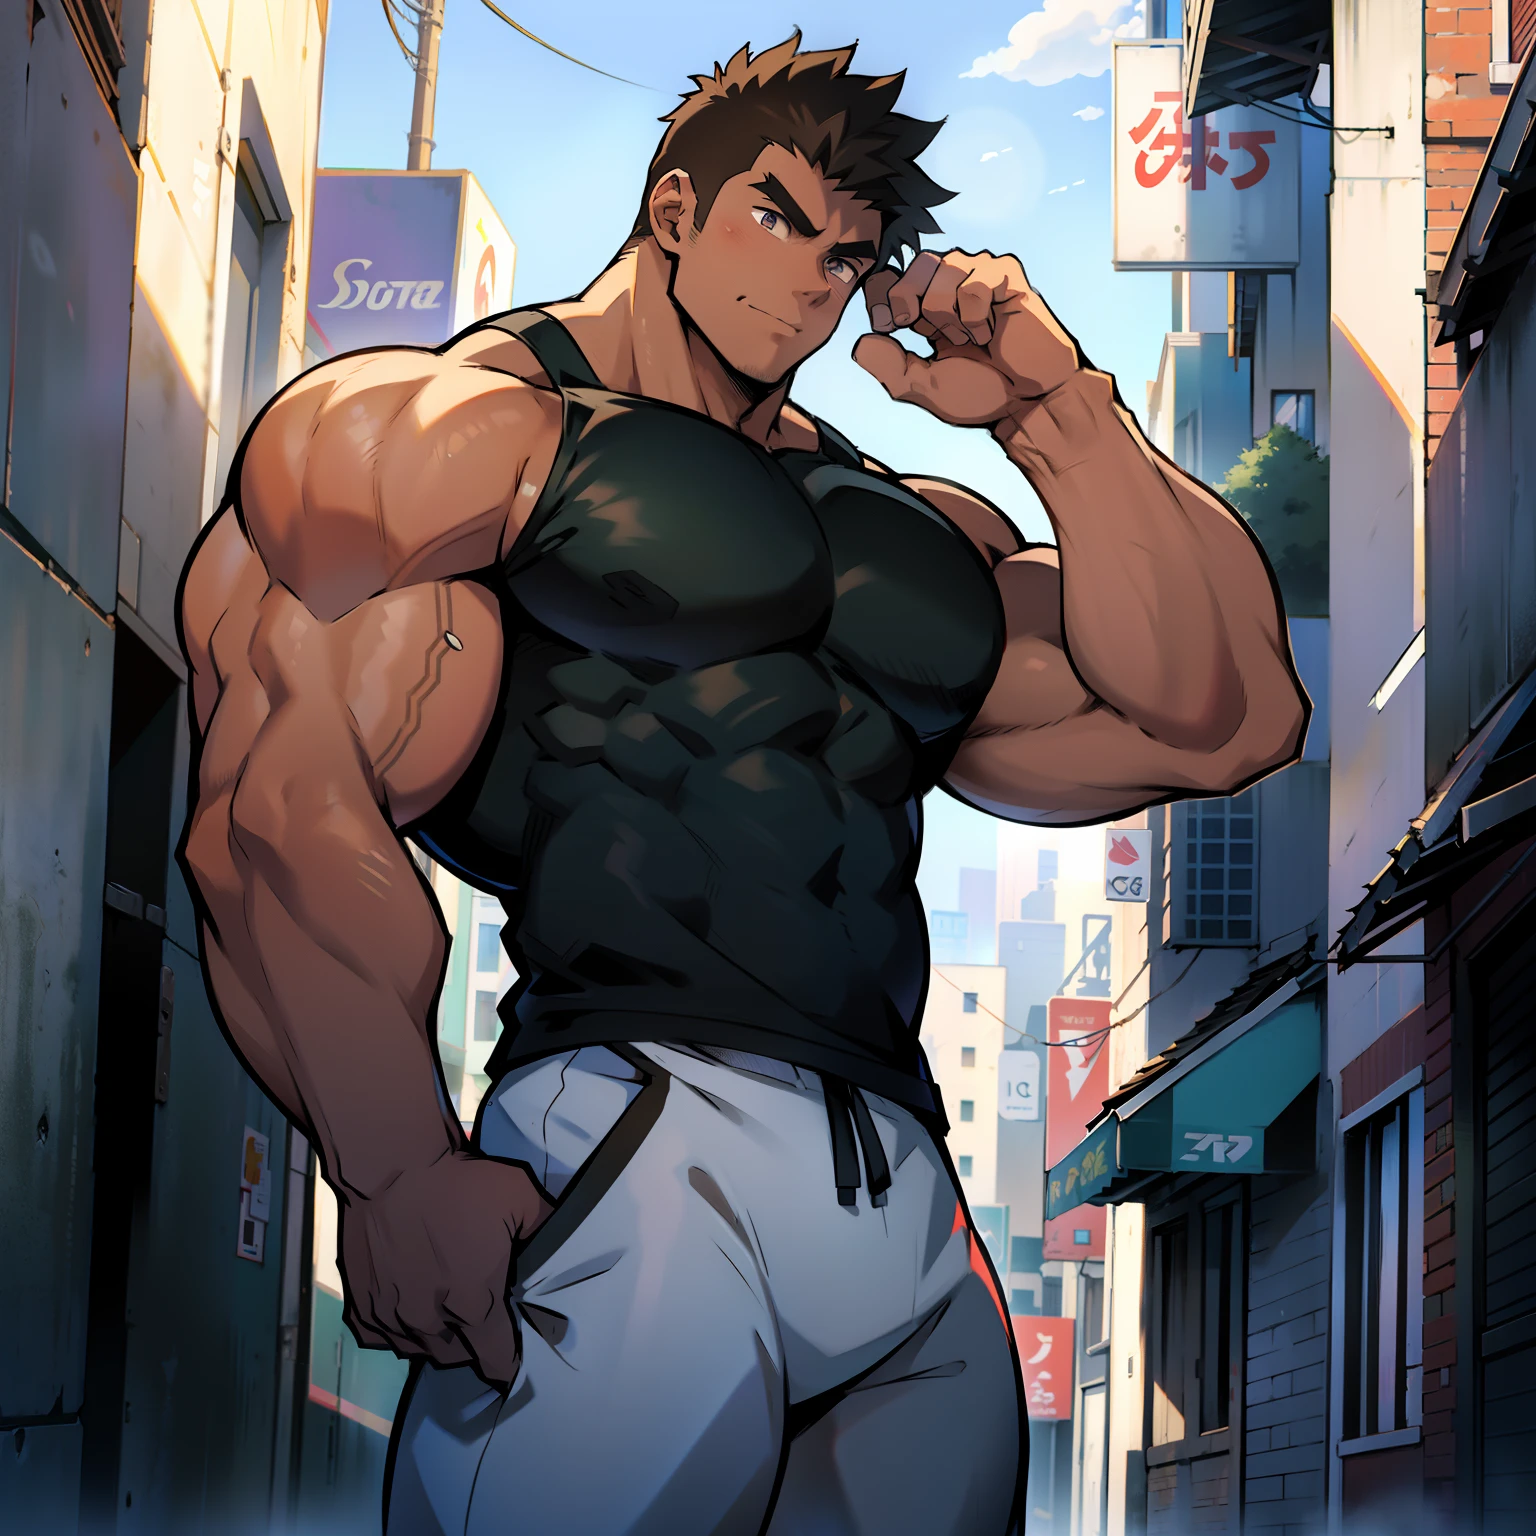 ((Anime style art)), Extremely muscular masculine character, bodybuilder body, wearing a sleeveless V-neck shirt, hands raised at neck level, The character is leaning against a wall. Pockets, Futuristic cityscape, Busy route, Buildings, person
AS & Vehicles. Main character from the anime, Nice image, Hard drive, 4k, Main character leaning against a wall with his hands at face level.